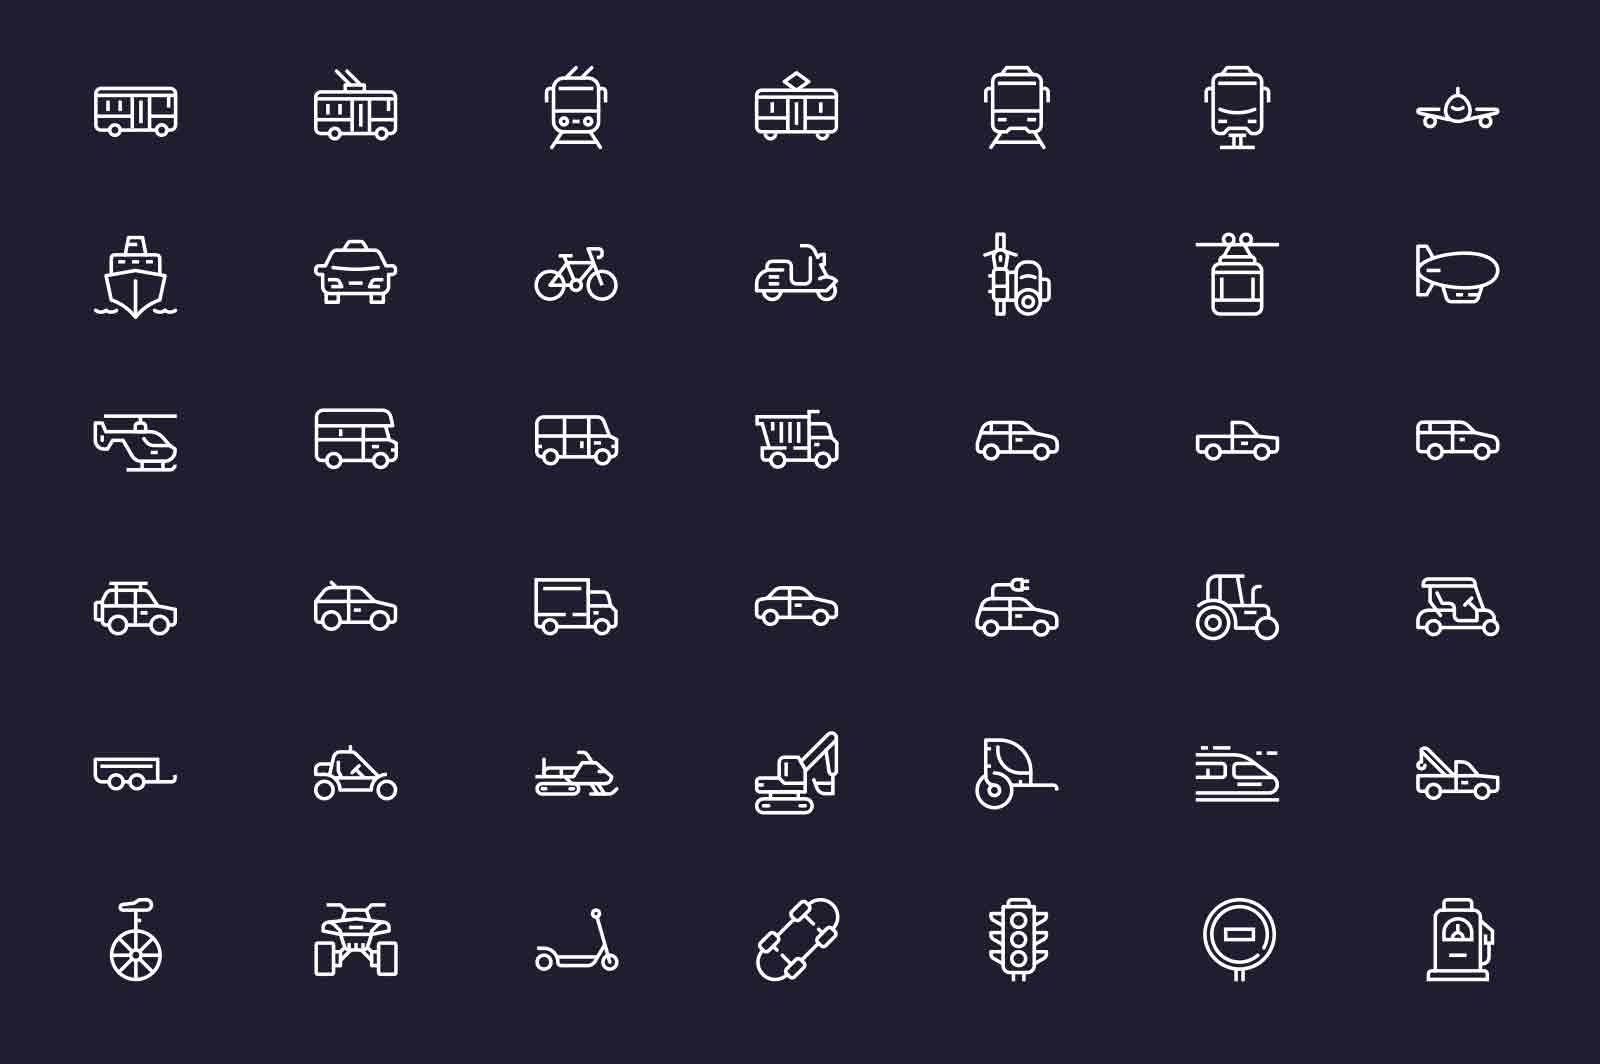 Cars and city transport icons set vector illustration. Airplane, bus, train, car, boat, tram line icon. Dark background